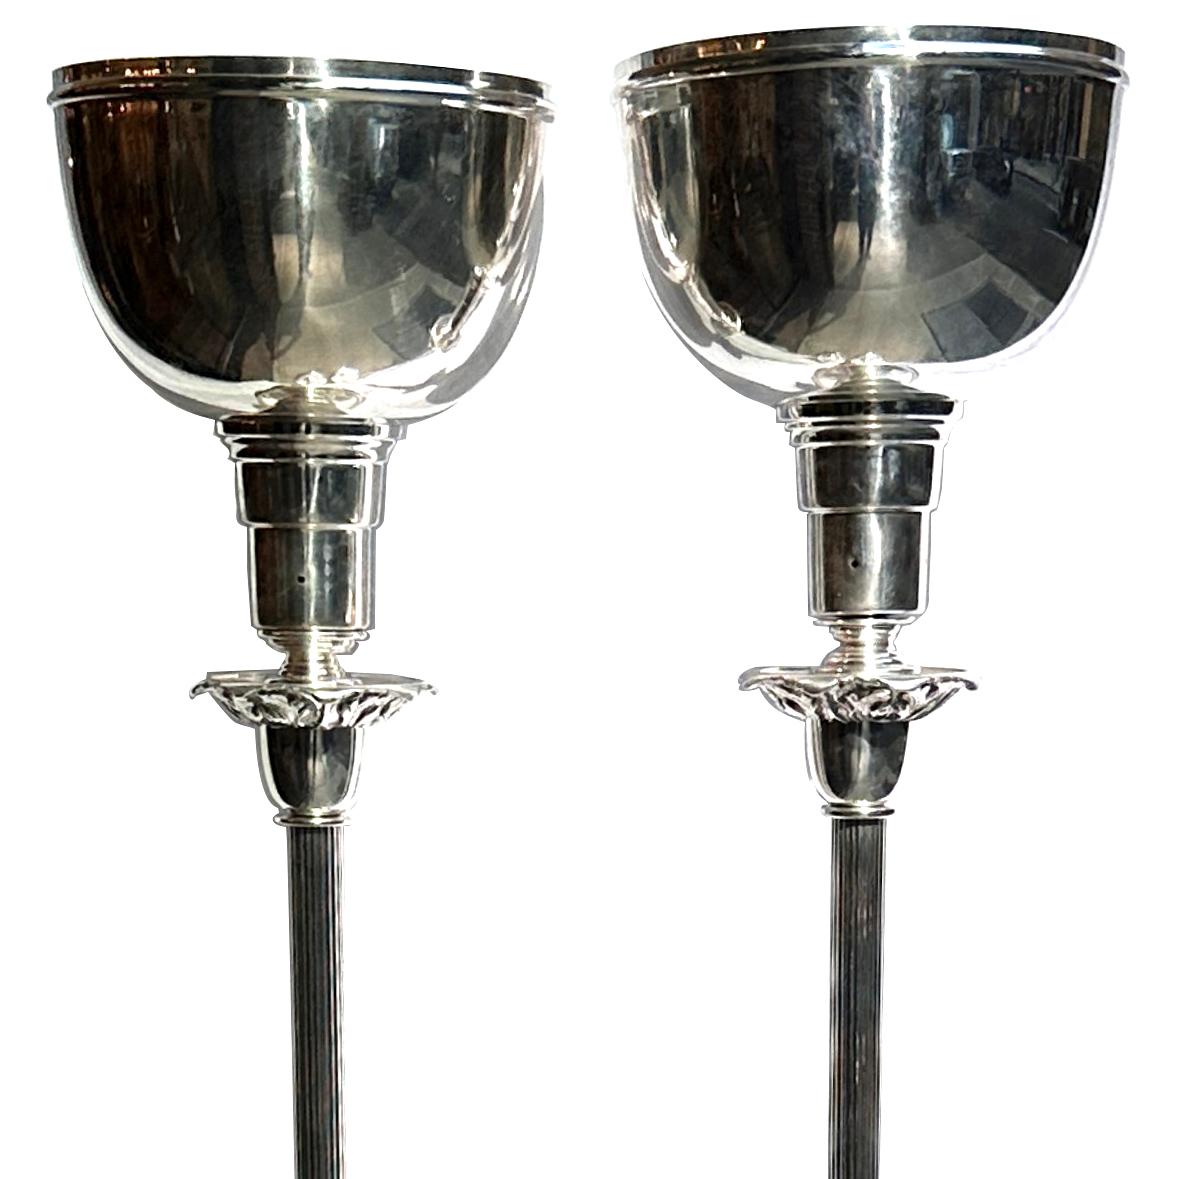 Pair of circa 1940's English silver-plated torcheres with uplight and with finely etched bases.

Measurements:
Total height: 64